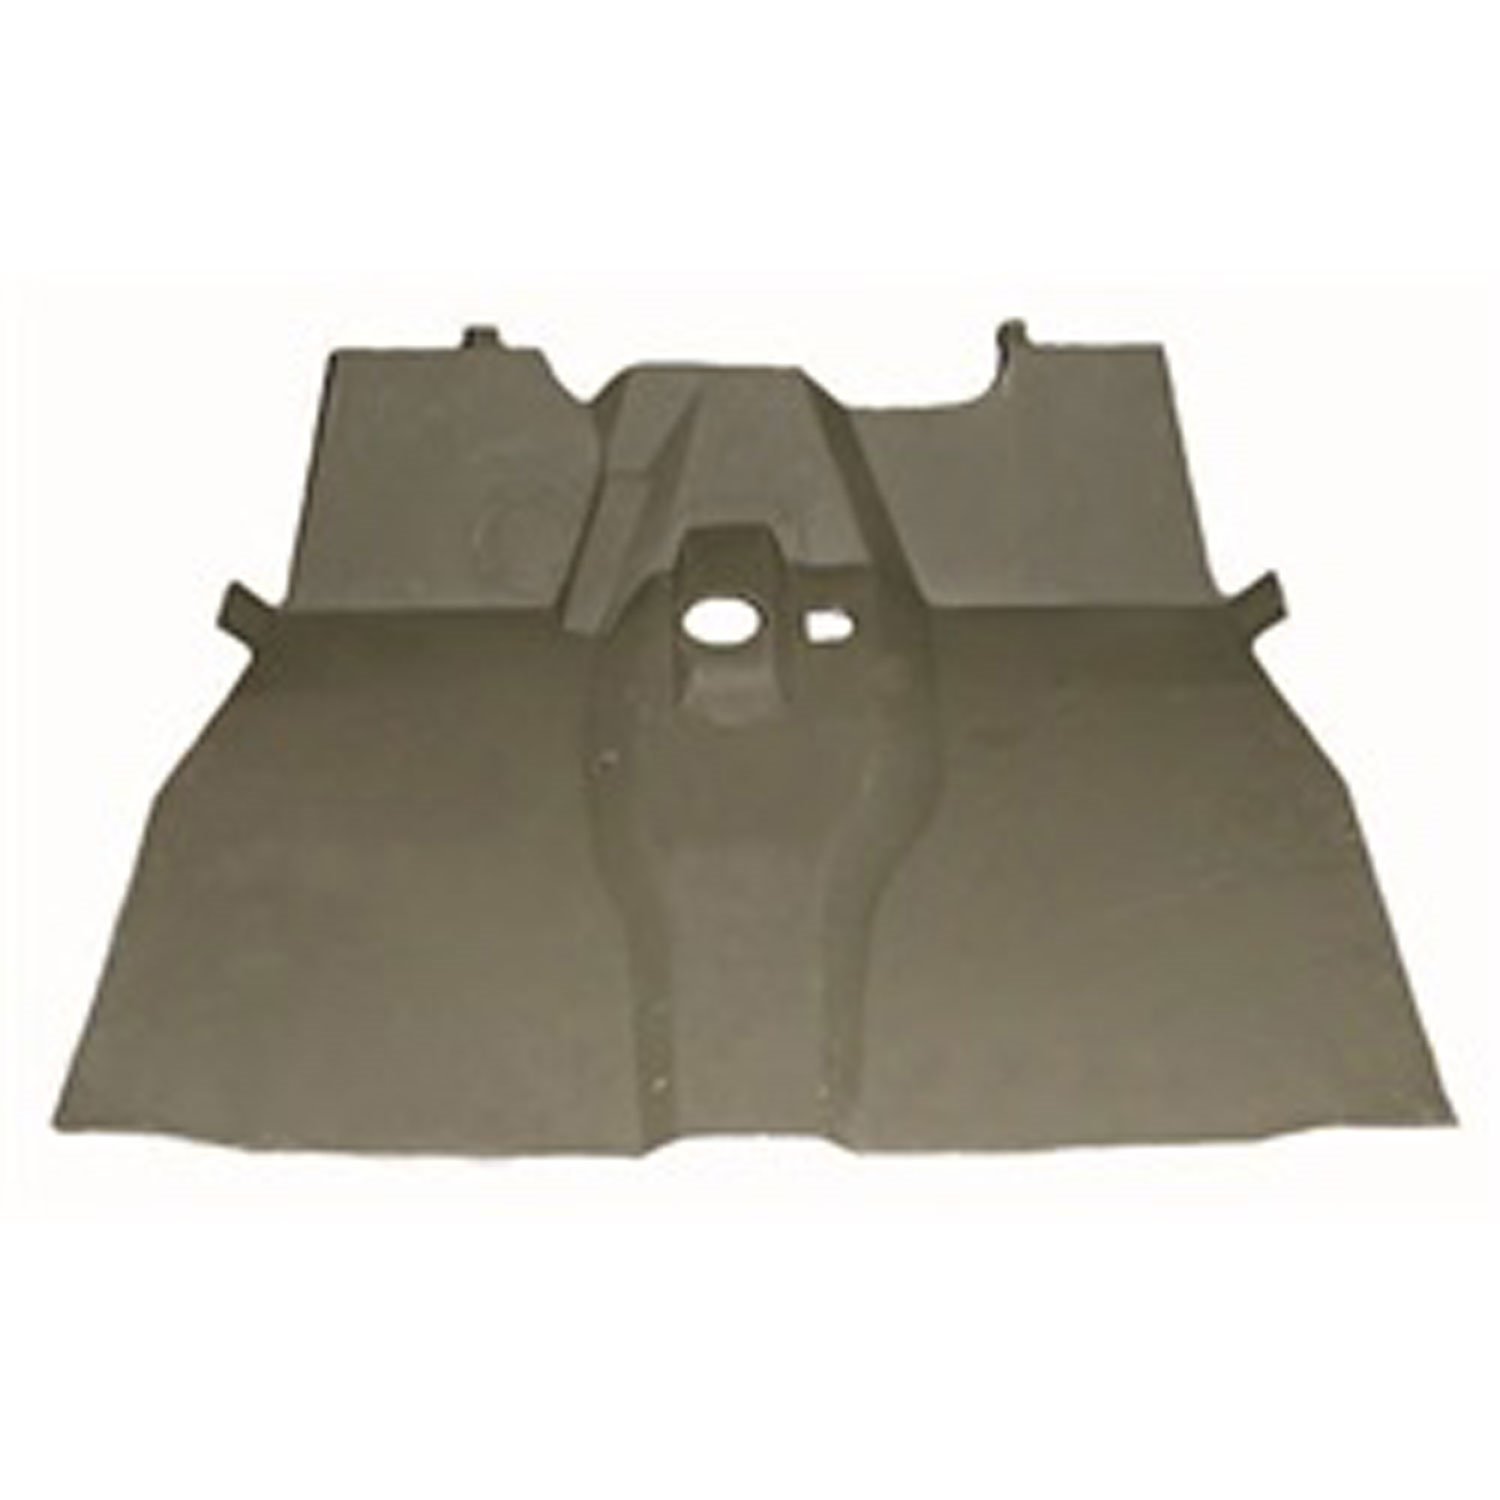 Replacement front floor panel from Omix-ADA, Fits 46-49 Willys CJ2A and 49-53 Willys CJ3A.is an 18 gauge steel panel.